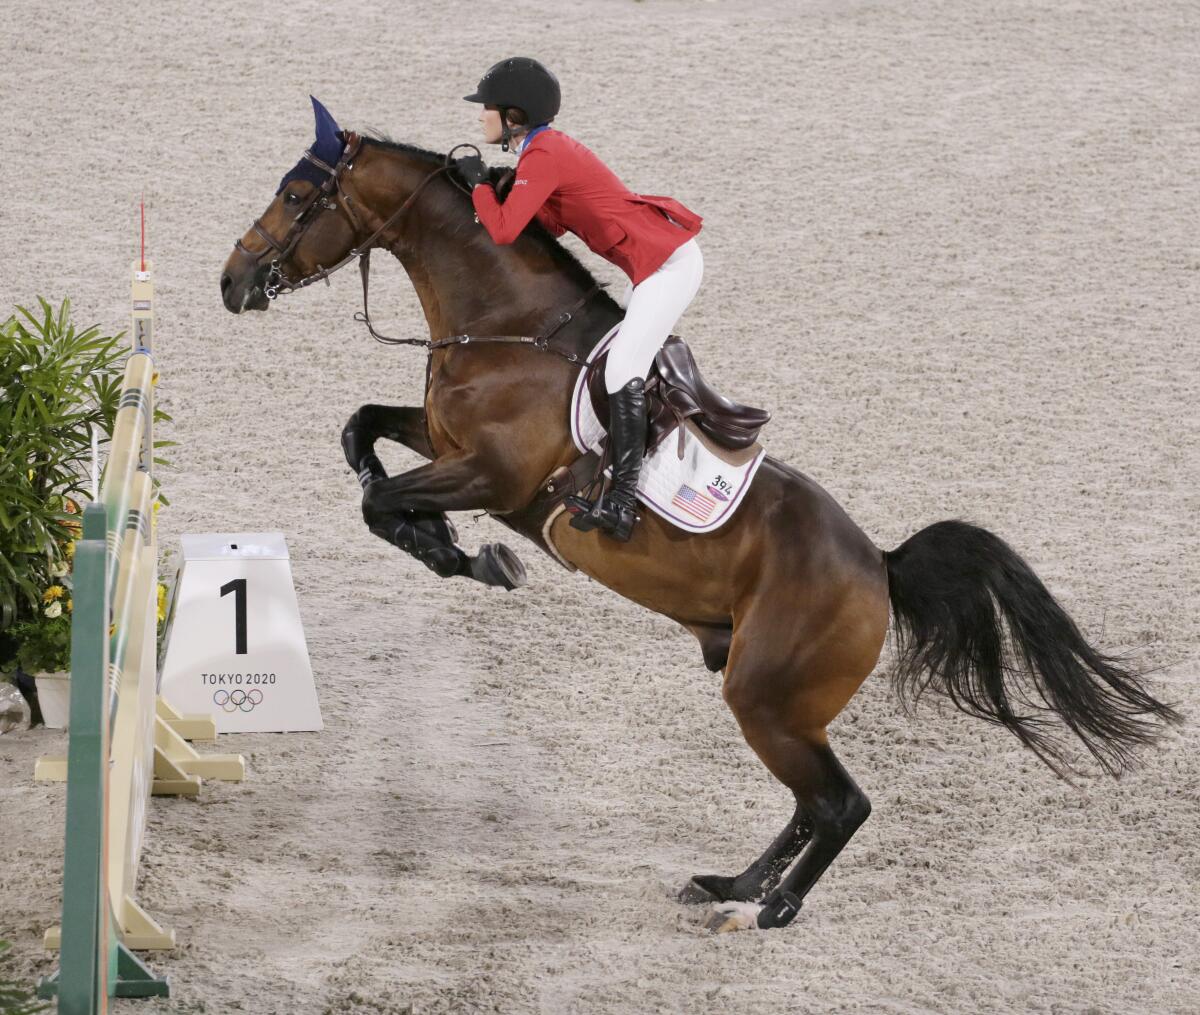 Jessica Springsteen's horse prepares to leap an obstacle.